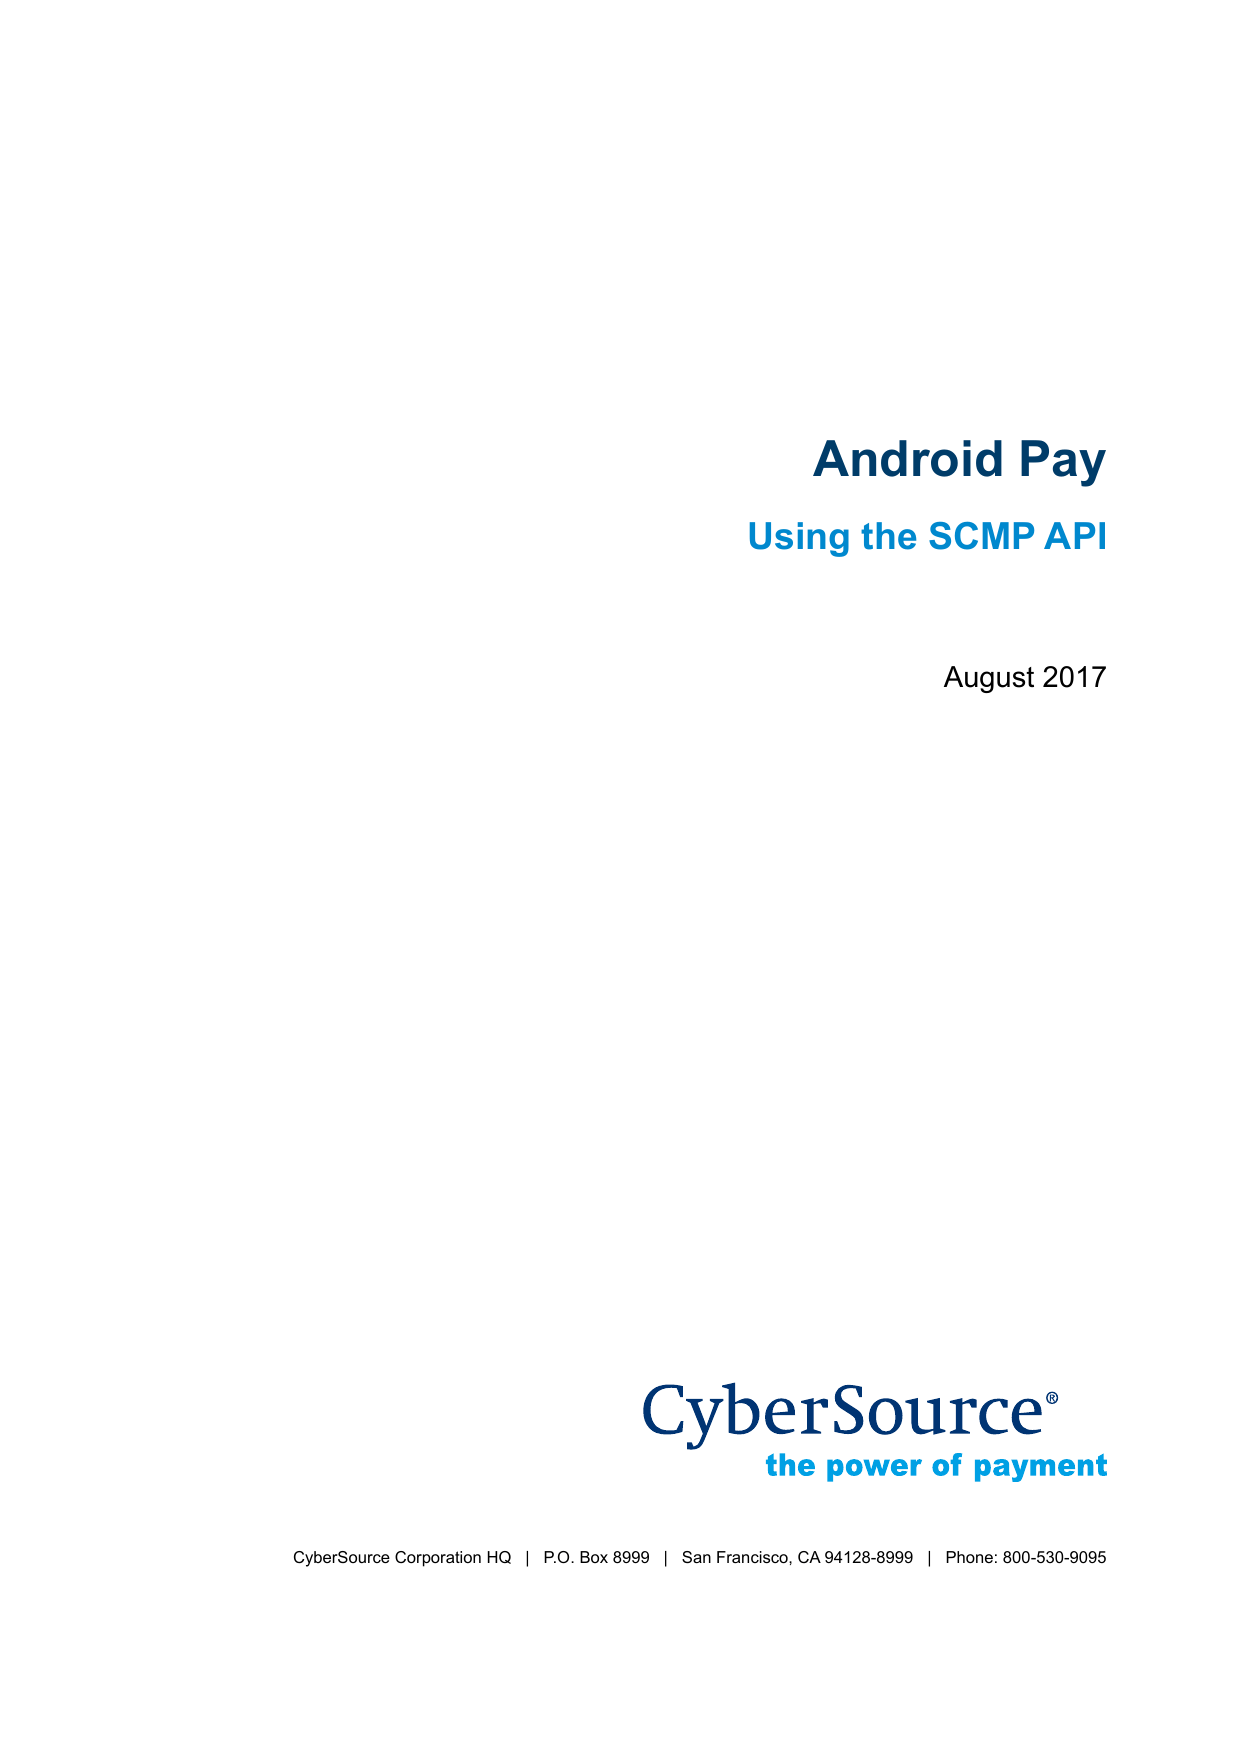 CyberSource Logo - Android Pay - CyberSource | manualzz.com